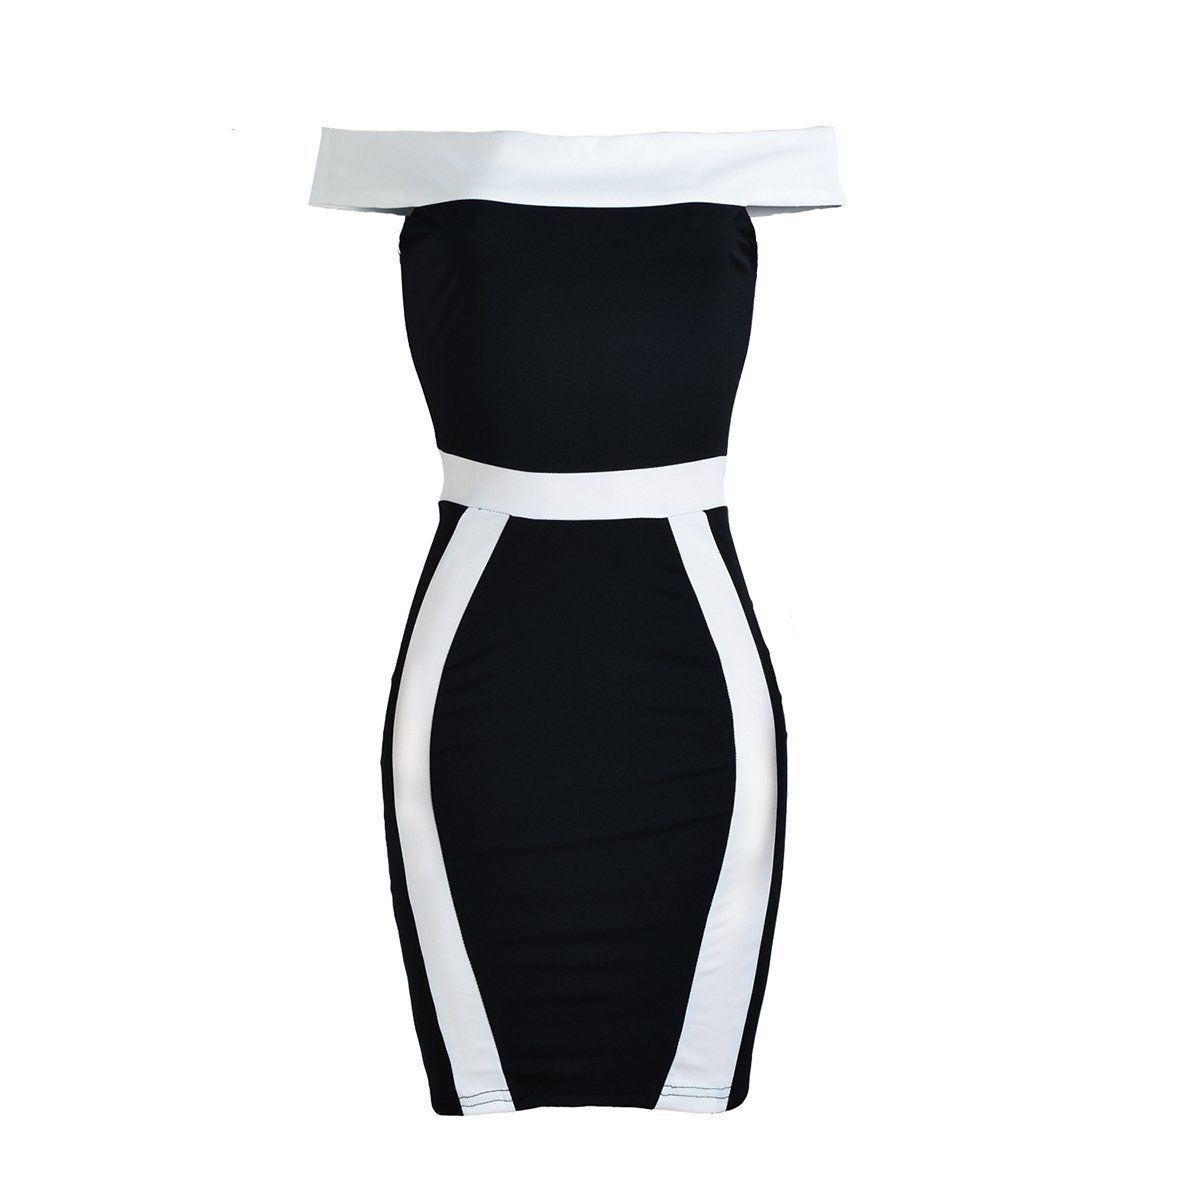 Off Shoulder Bodycon Dress Women Clothes Clothing Dresses Casual Bandage short Sleeve Party Fashion Women - TRIPLE AAA Fashion Collection